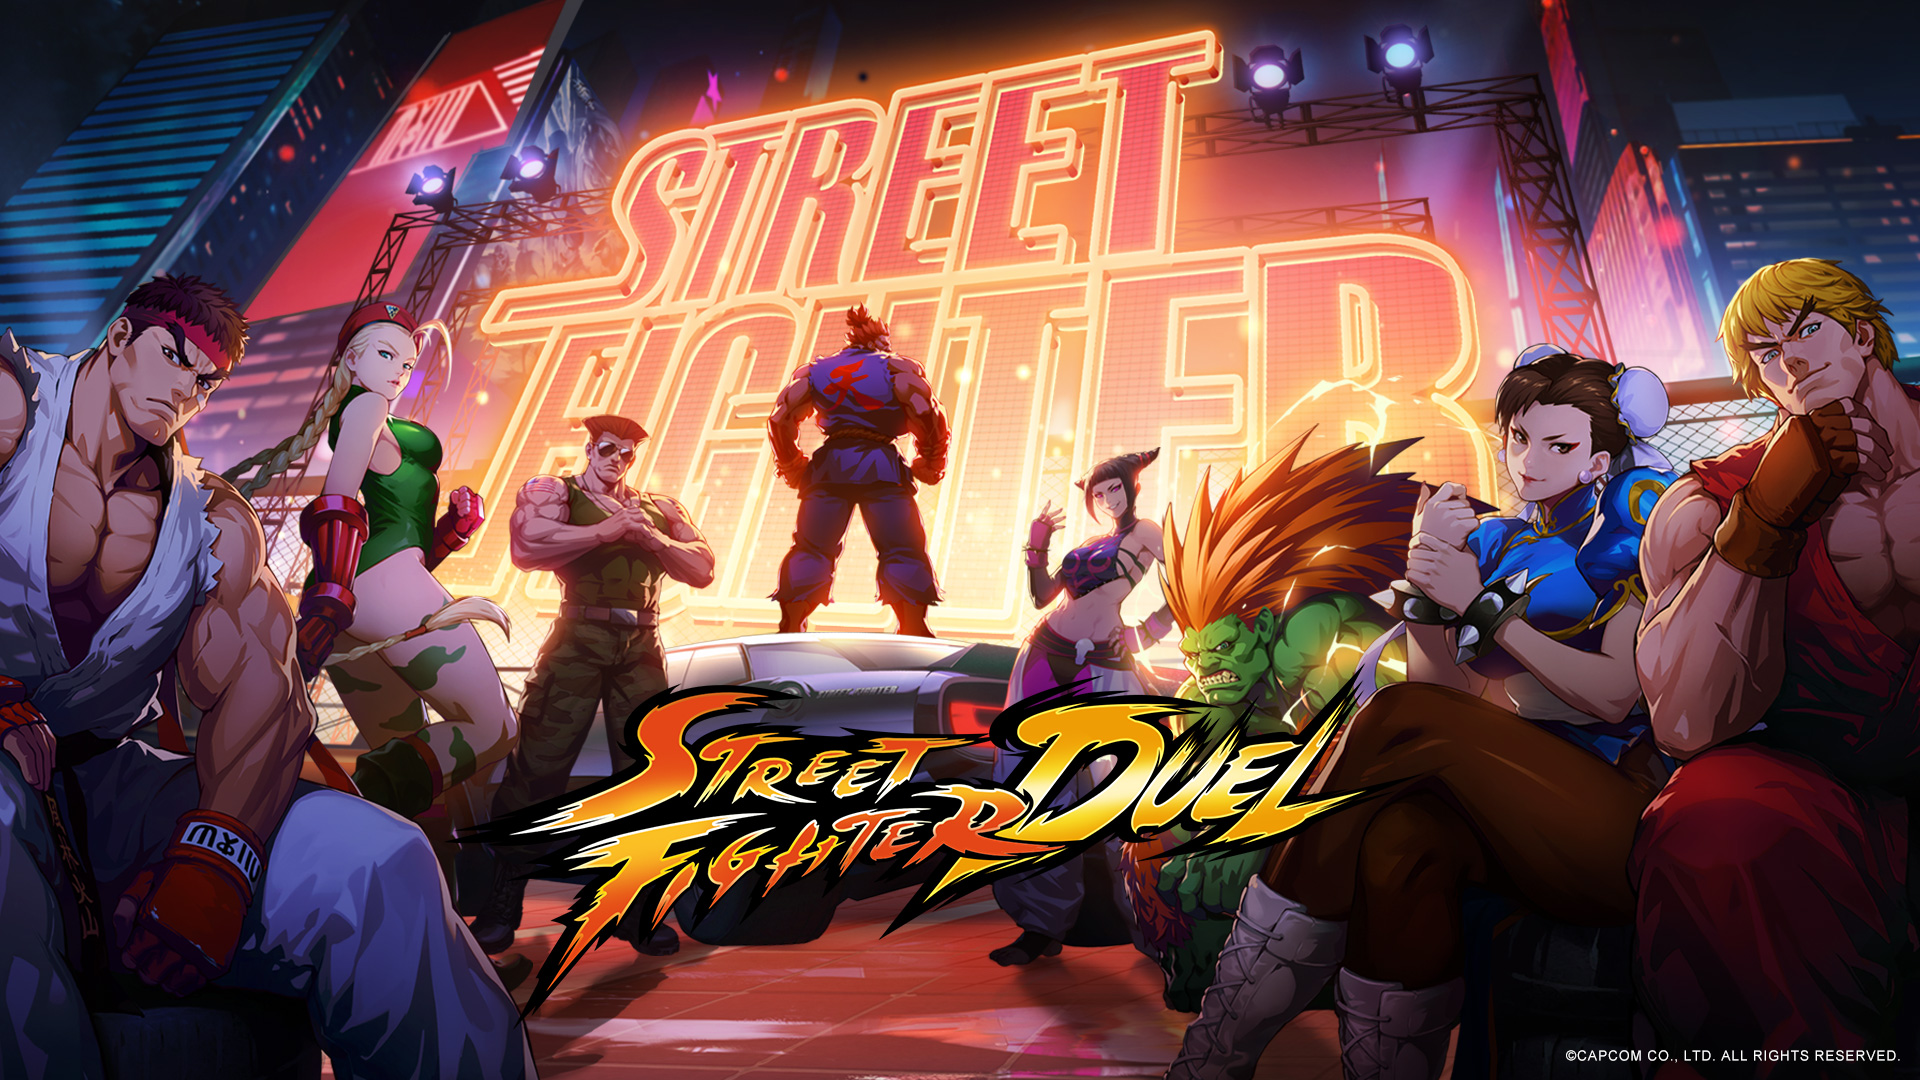 Update: Street Fighter: Duel release date finally announced